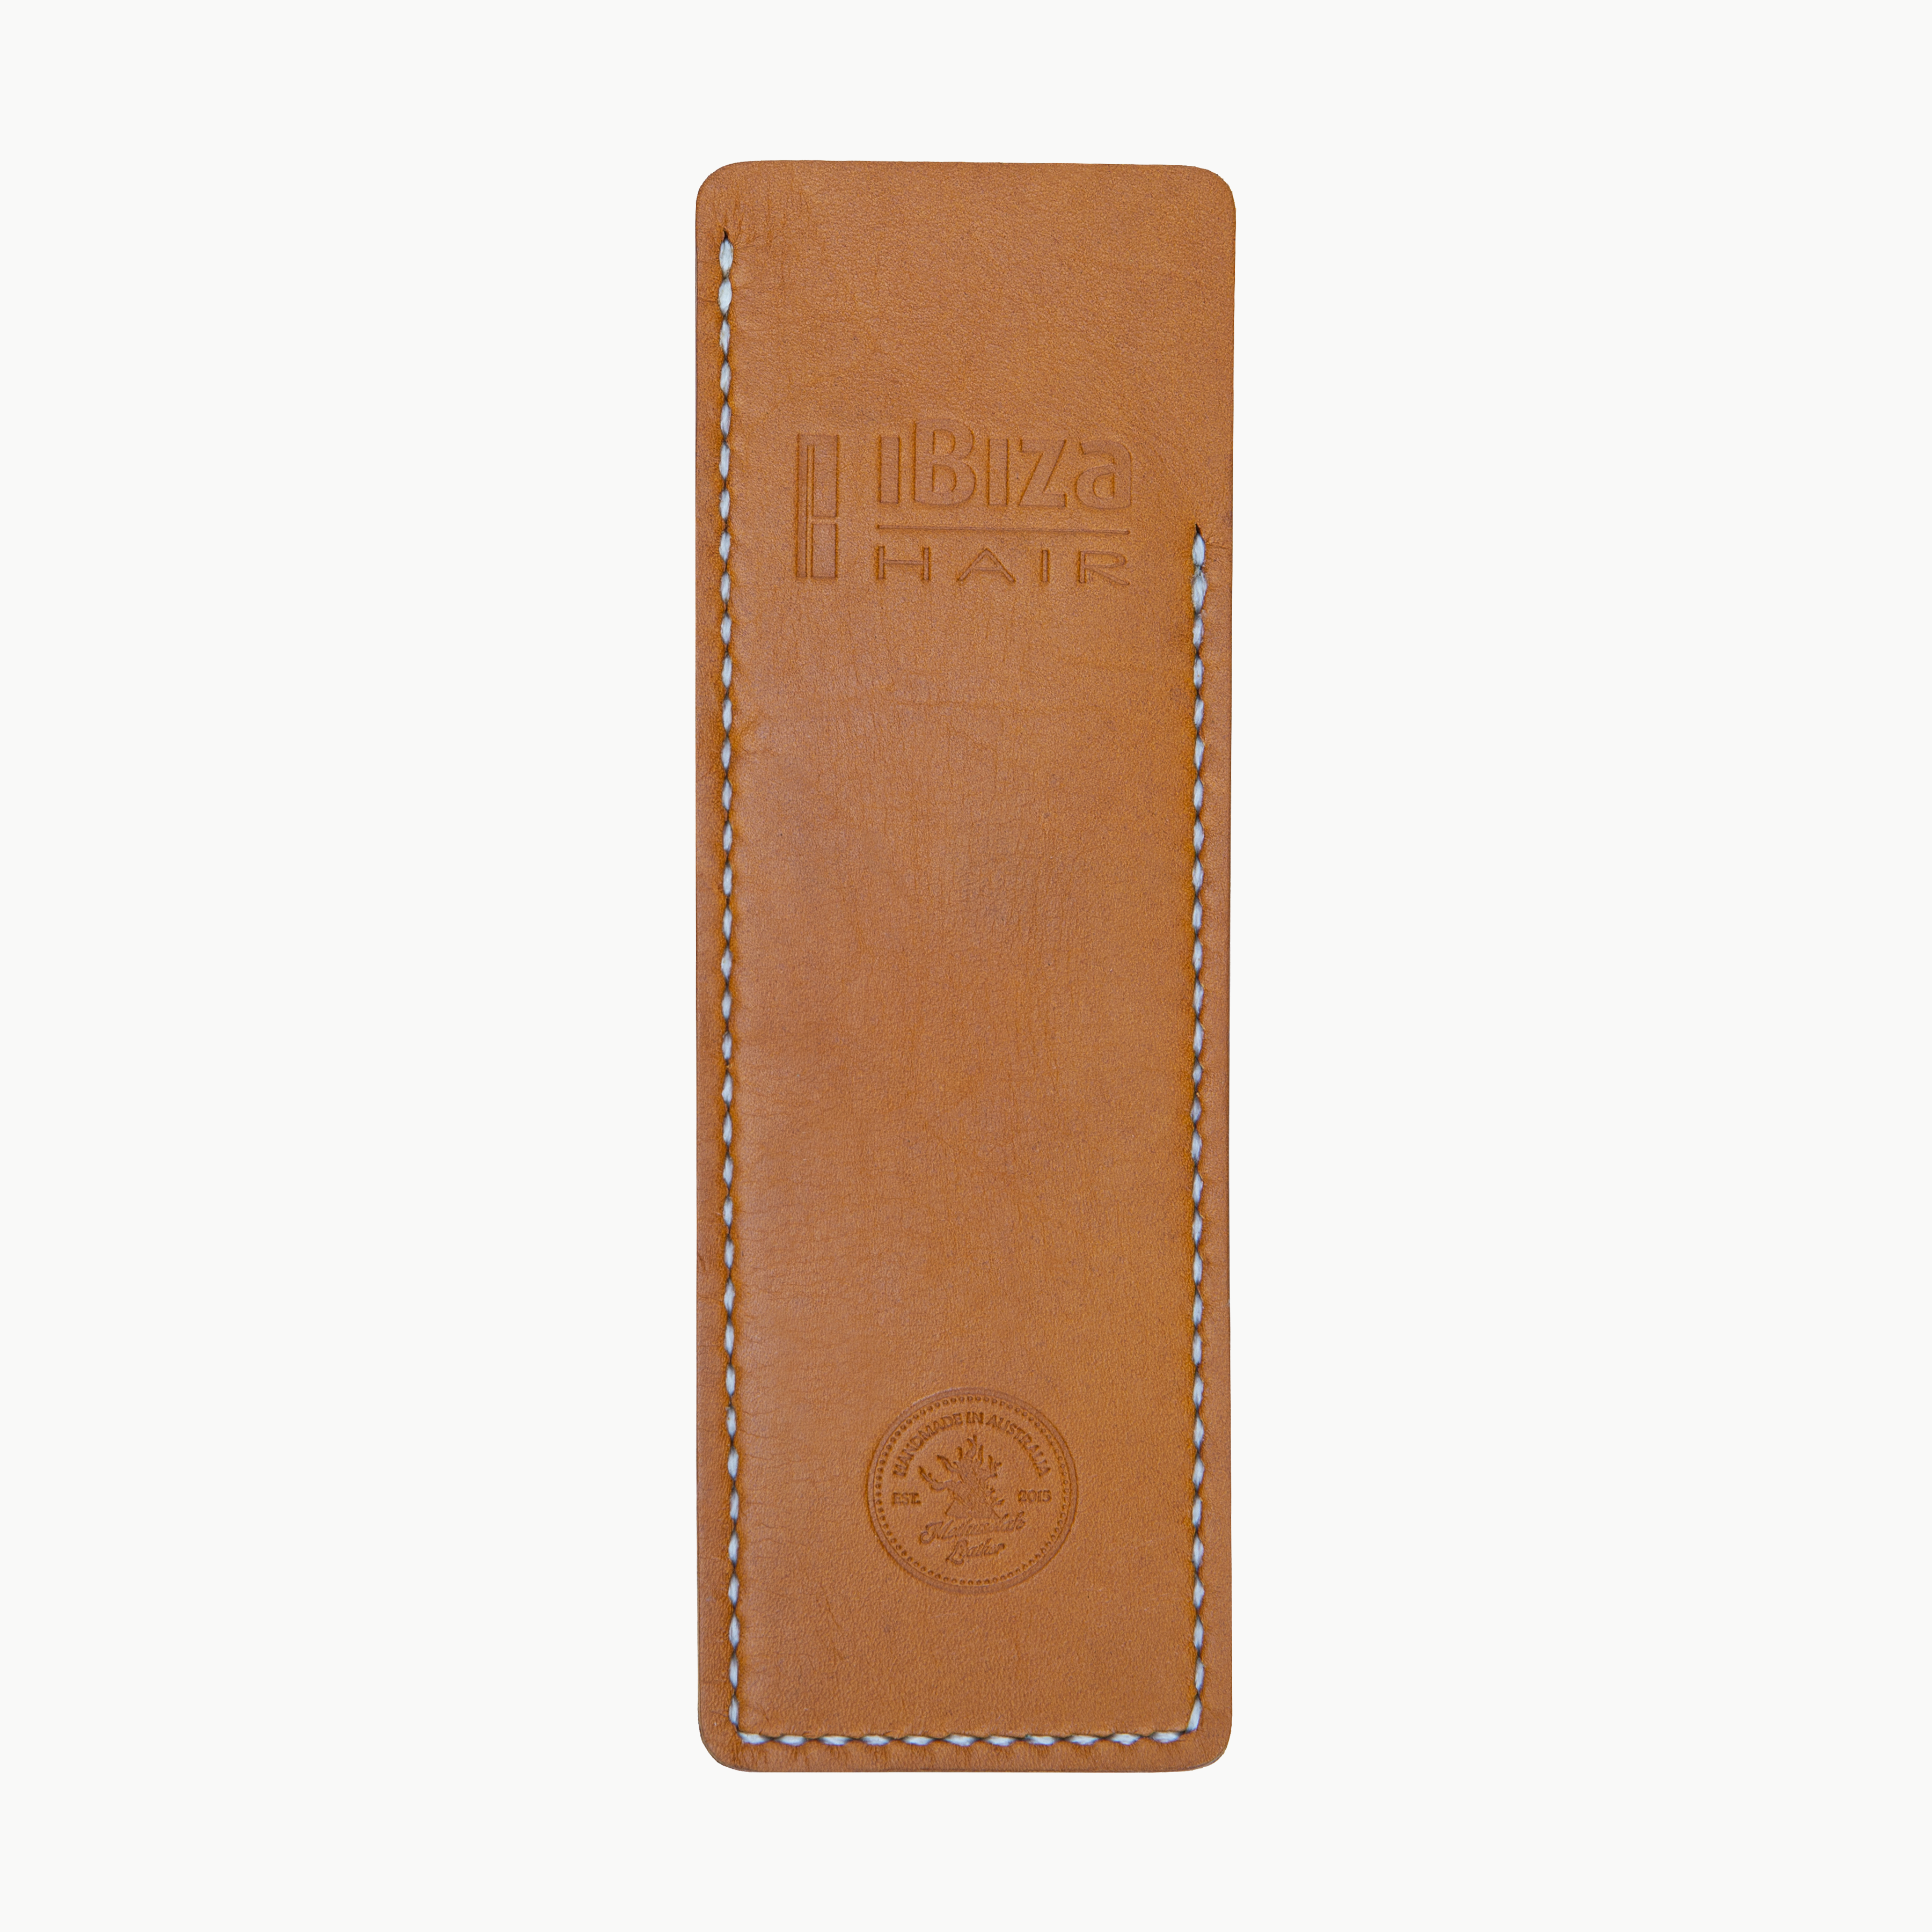 Comb Sleeve lite tan leather